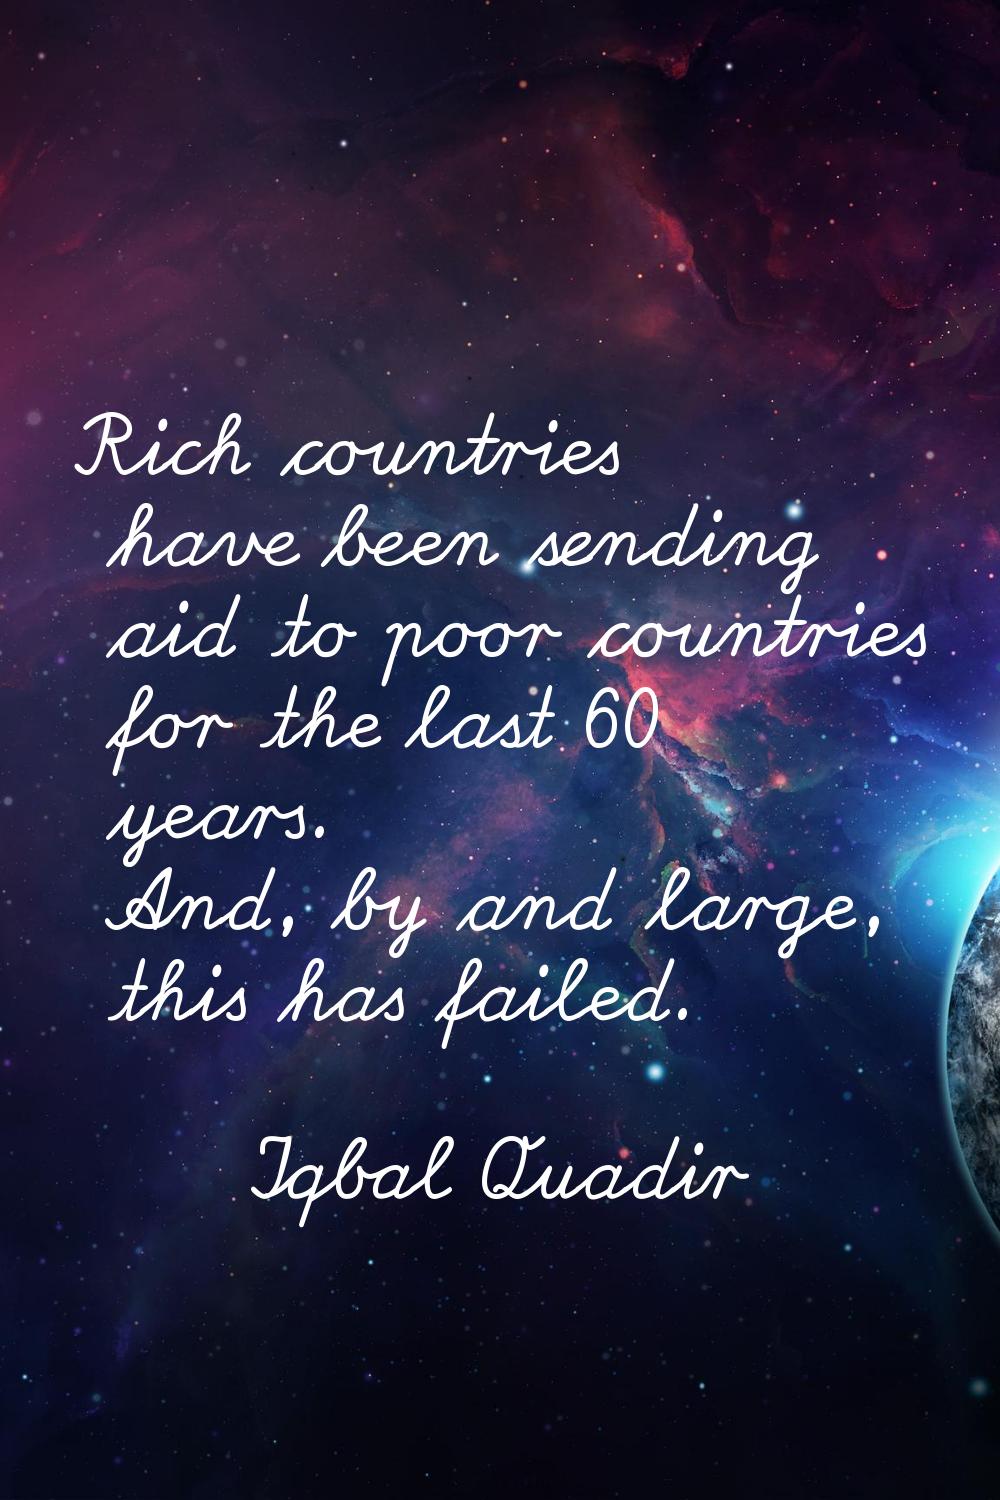 Rich countries have been sending aid to poor countries for the last 60 years. And, by and large, th